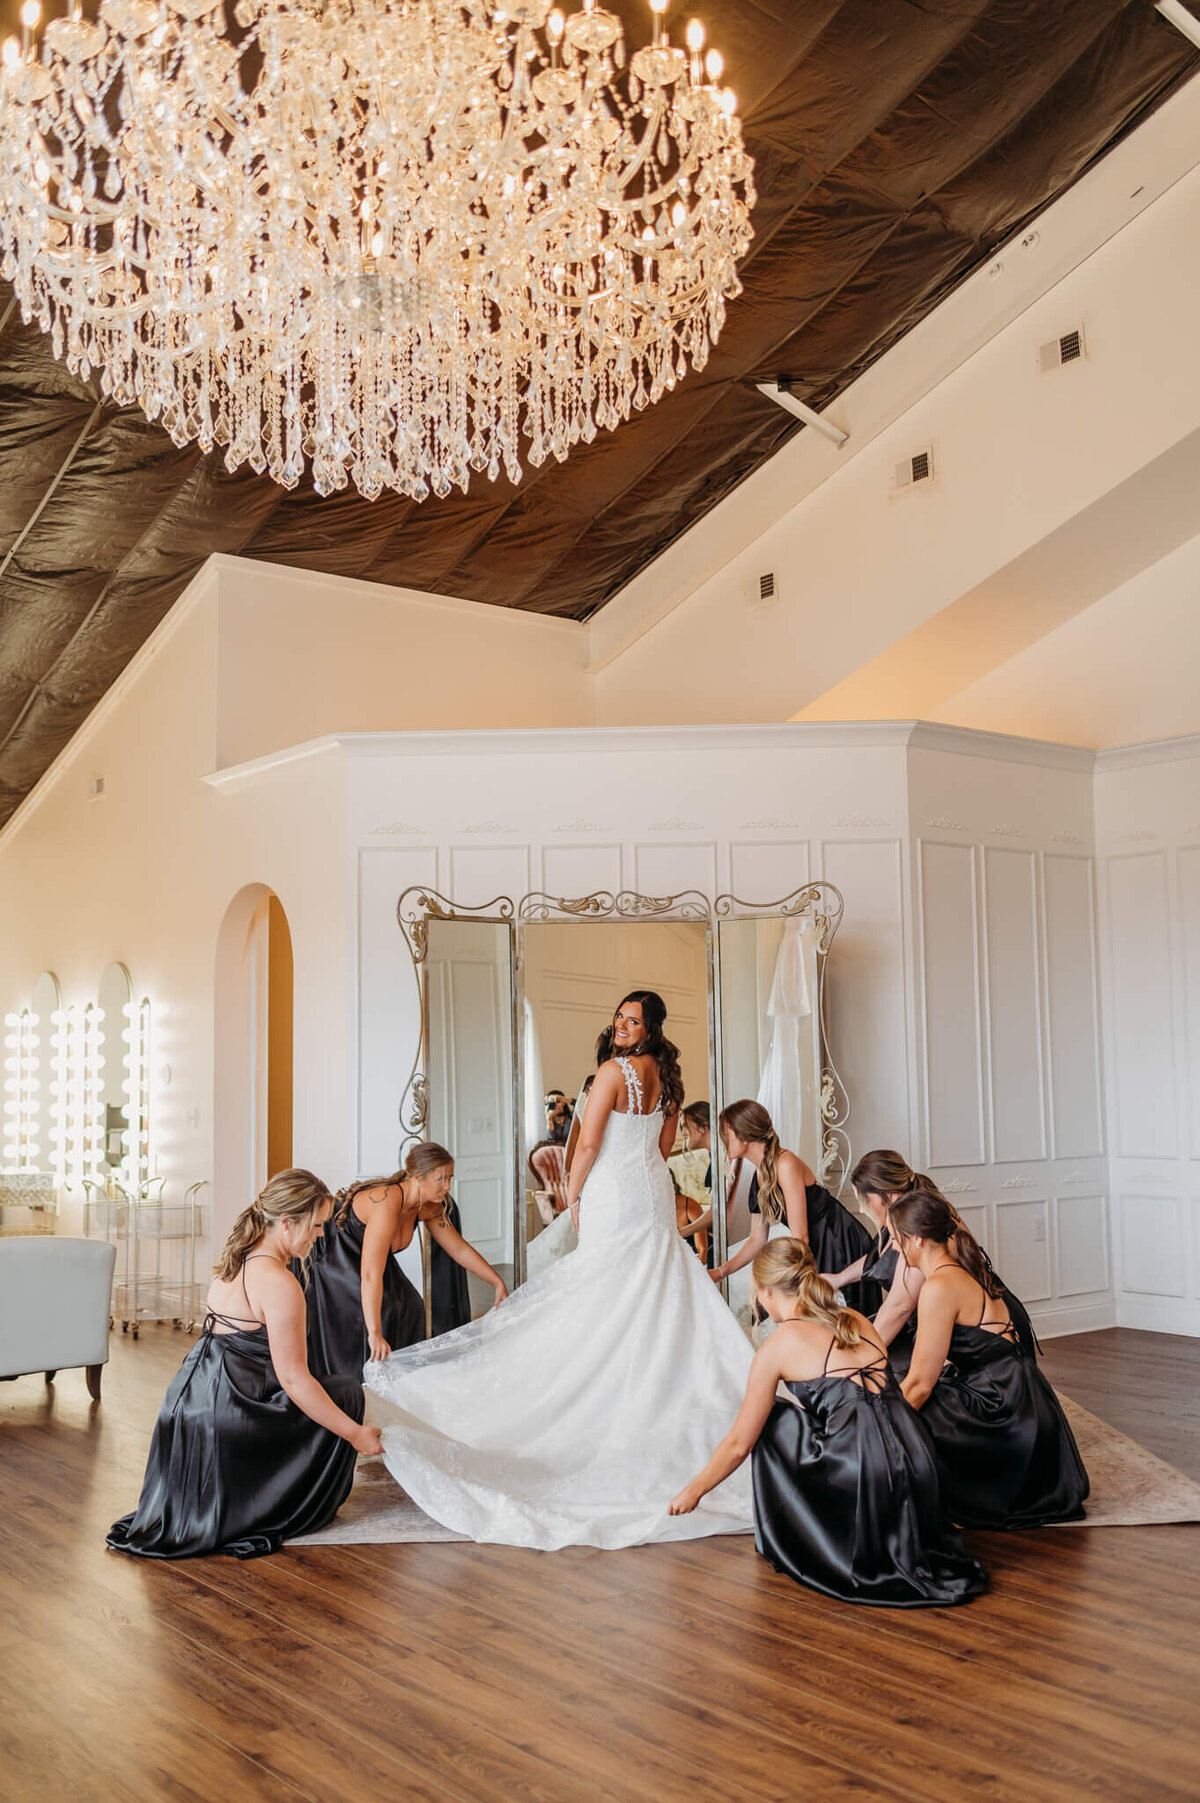 Photo of a bride standing in front of a mirror and under a chandelier as her bridesmaids fix her dress